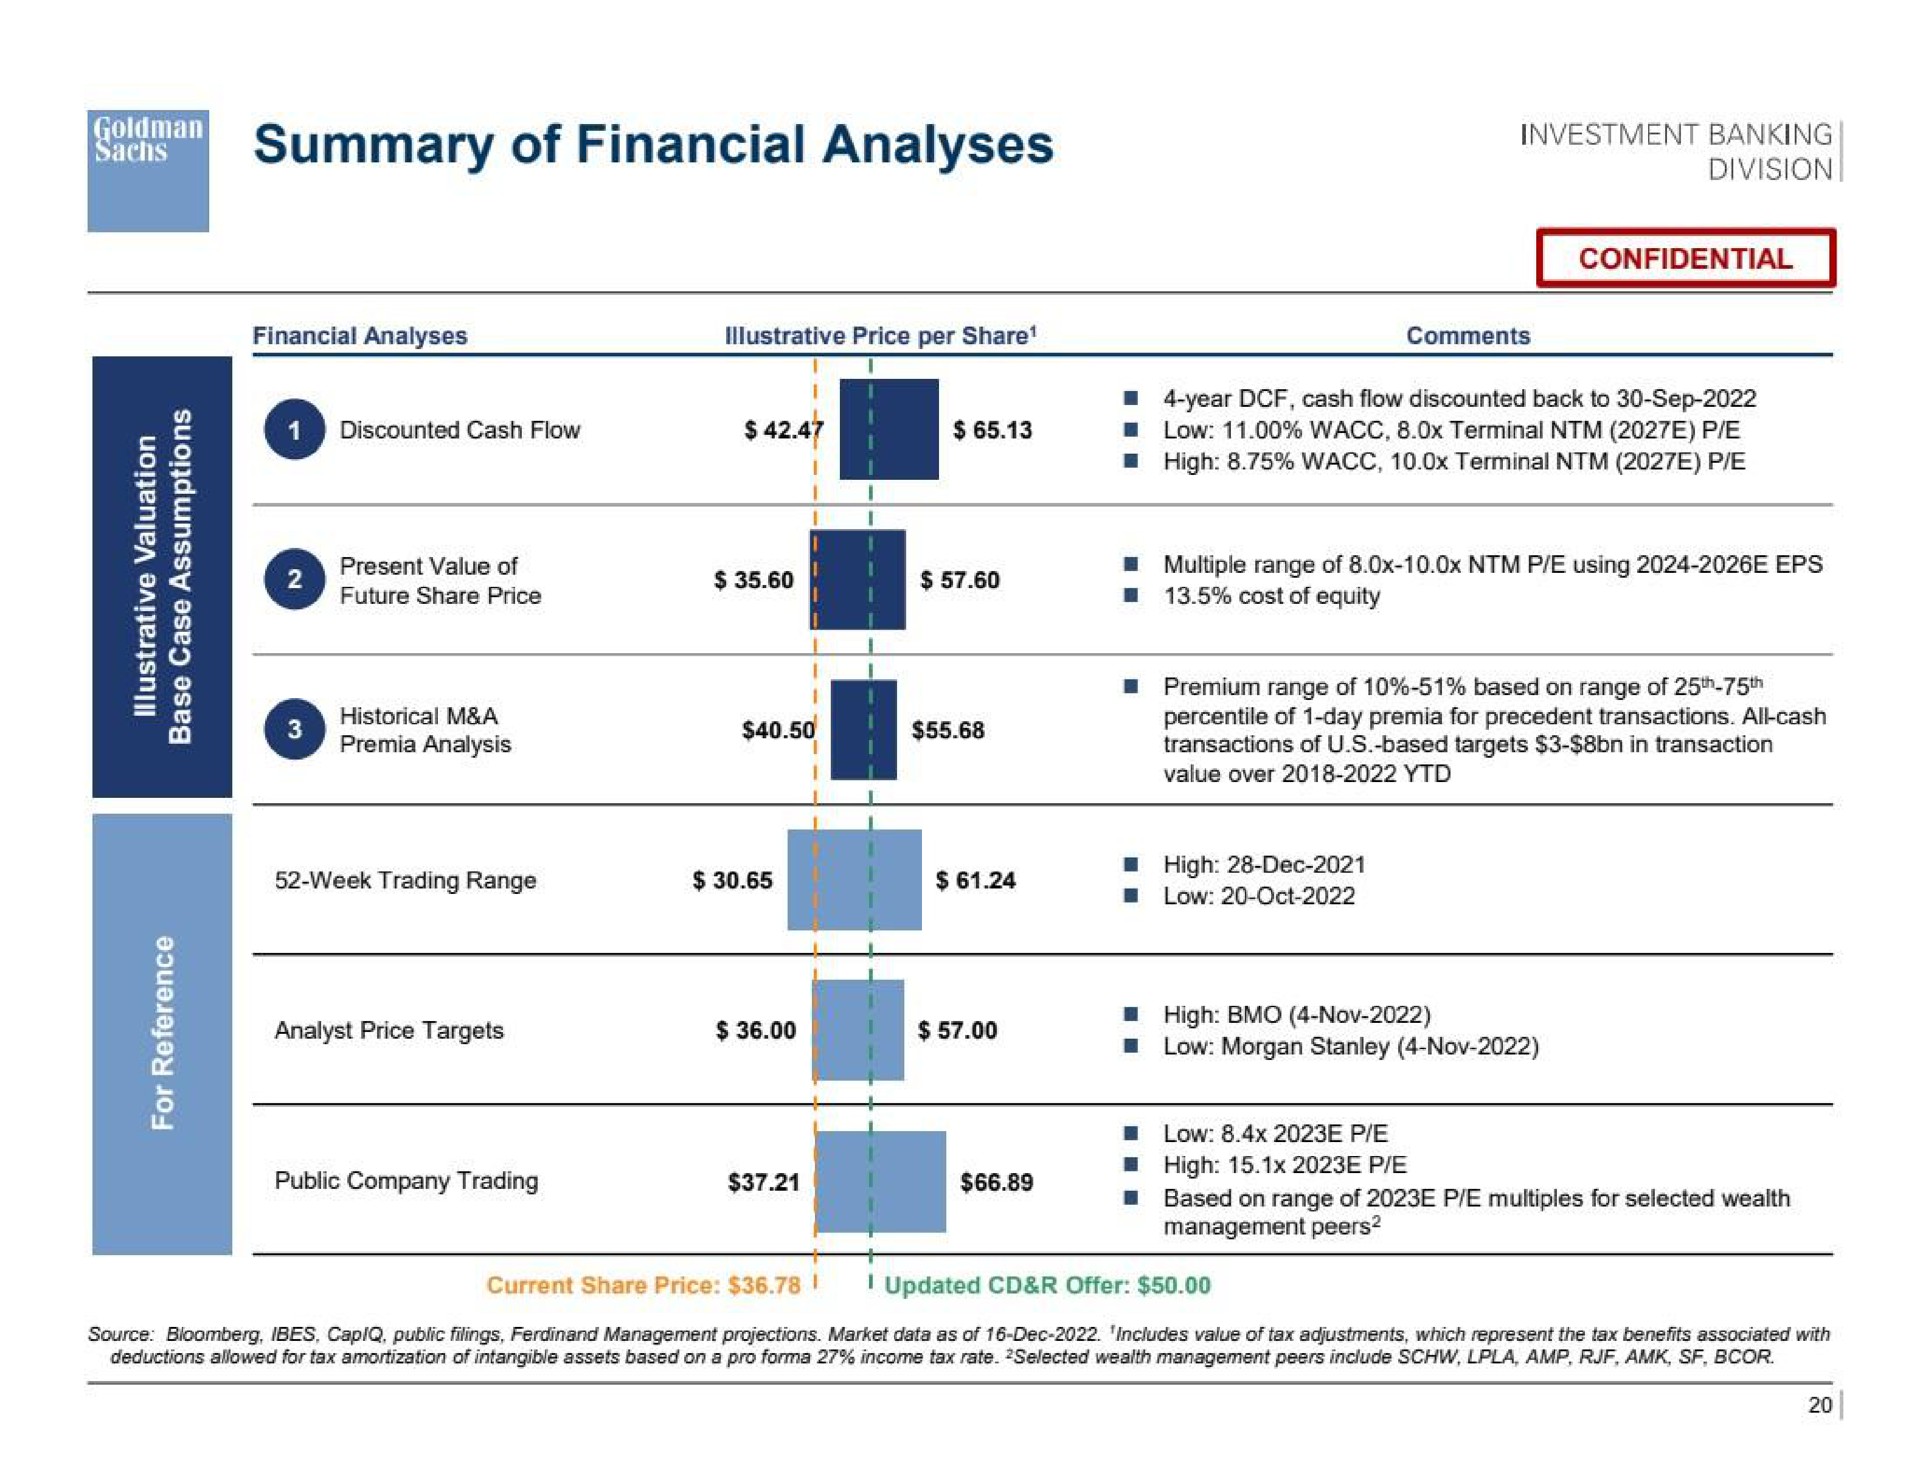 summary of financial analyses division | Goldman Sachs